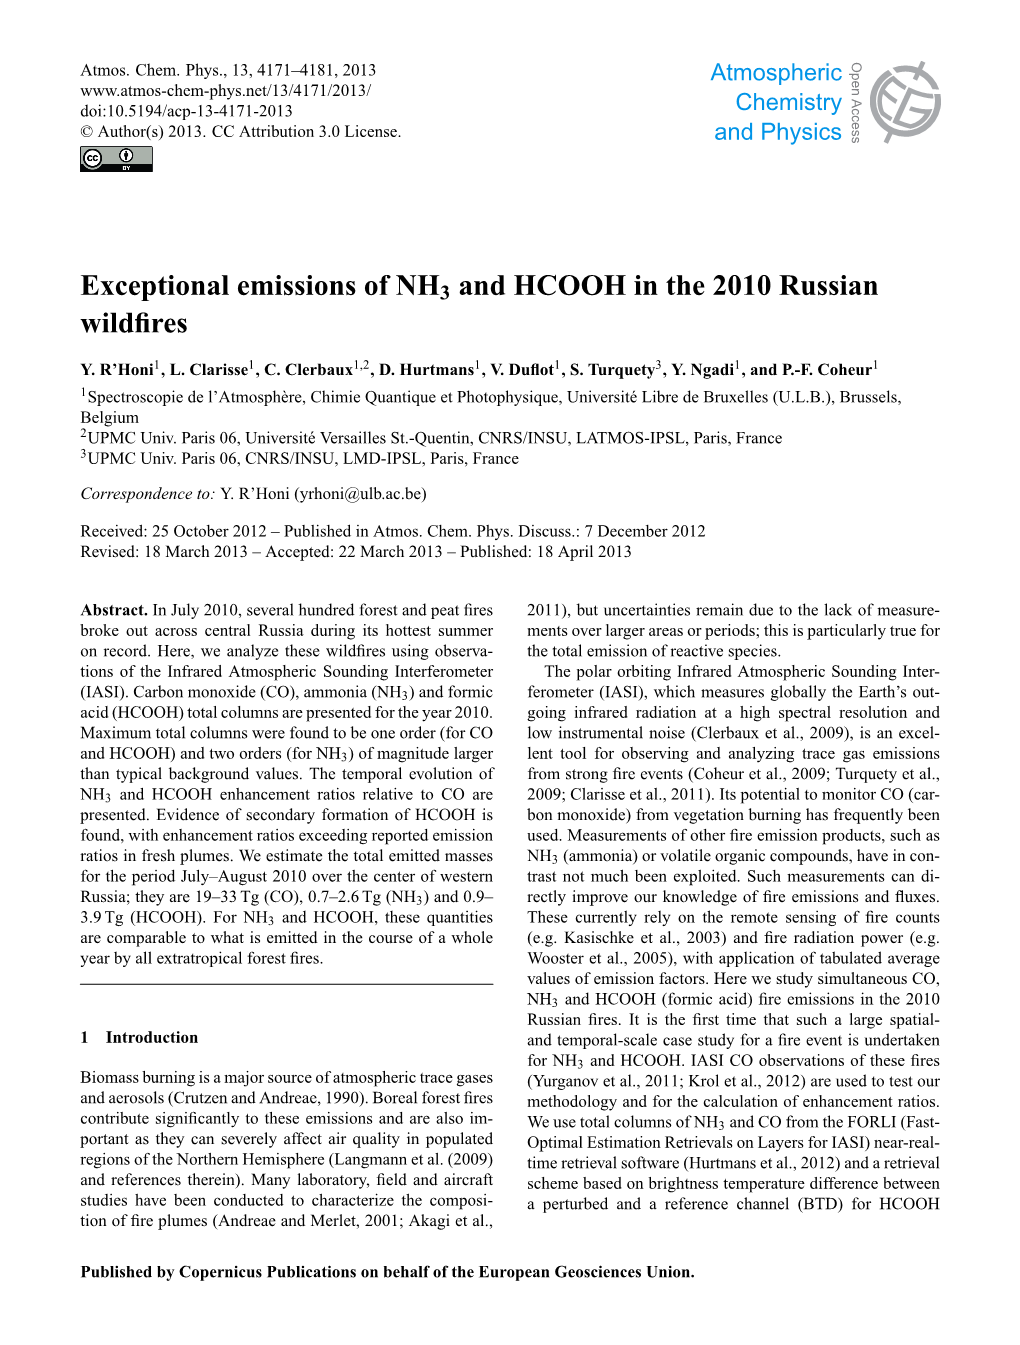 Exceptional Emissions of NH3 and HCOOH in the 2010 Russian Wildfires